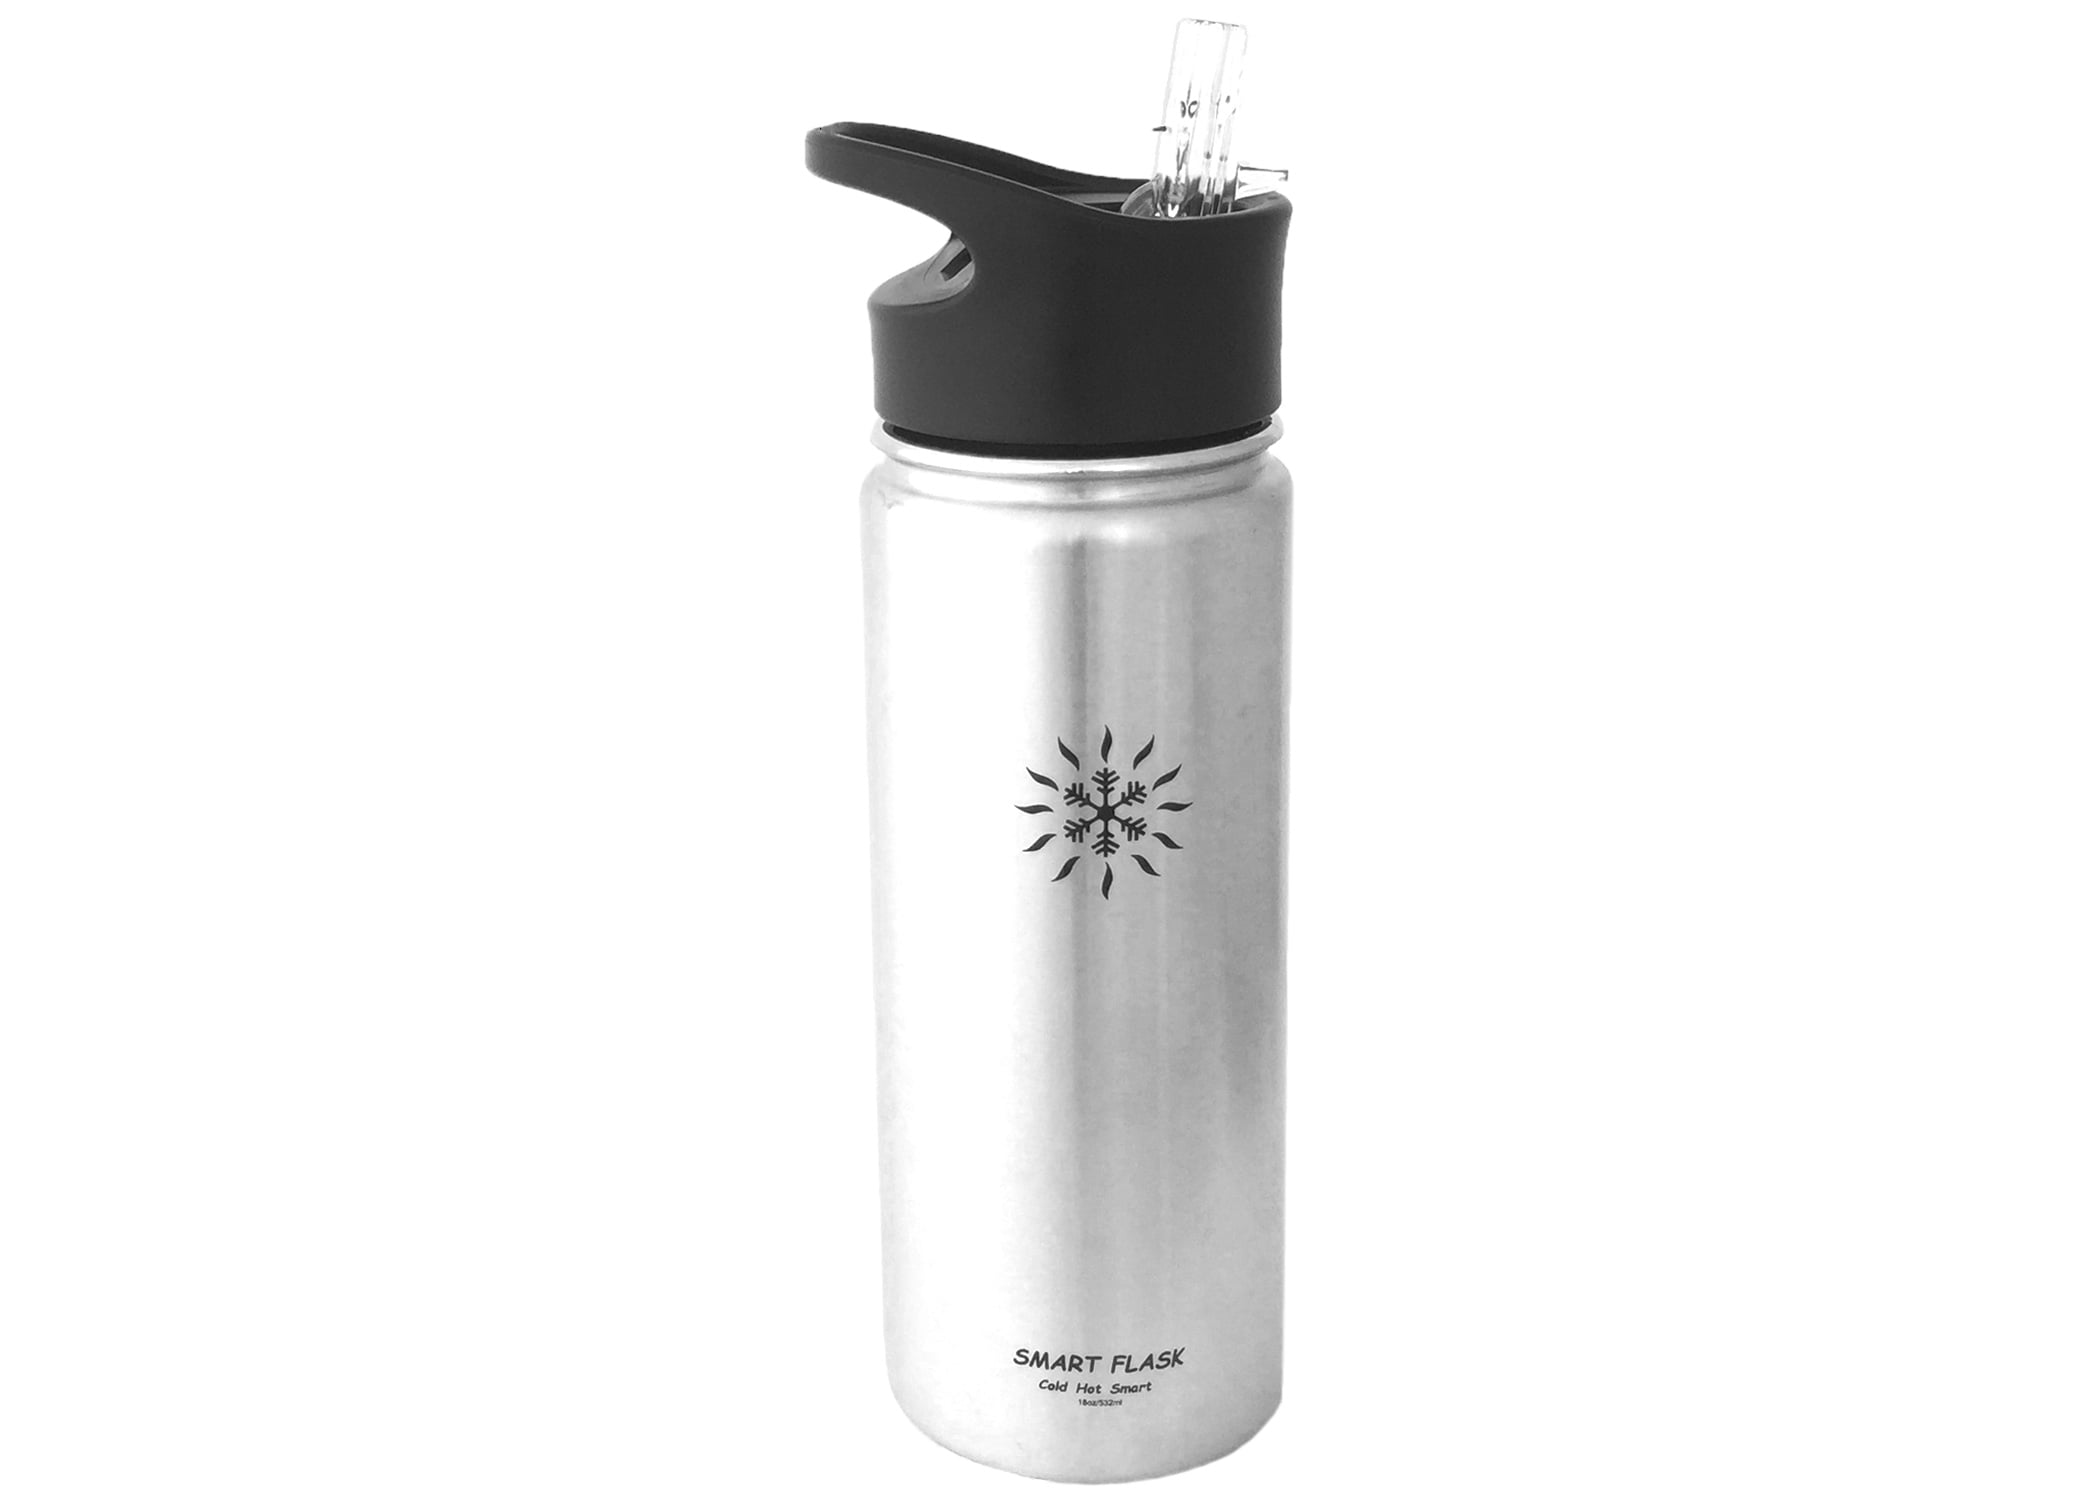 Smart Flask Stainless Steel Water Bottle Vacuum Insulated 18 oz  Straw Lid